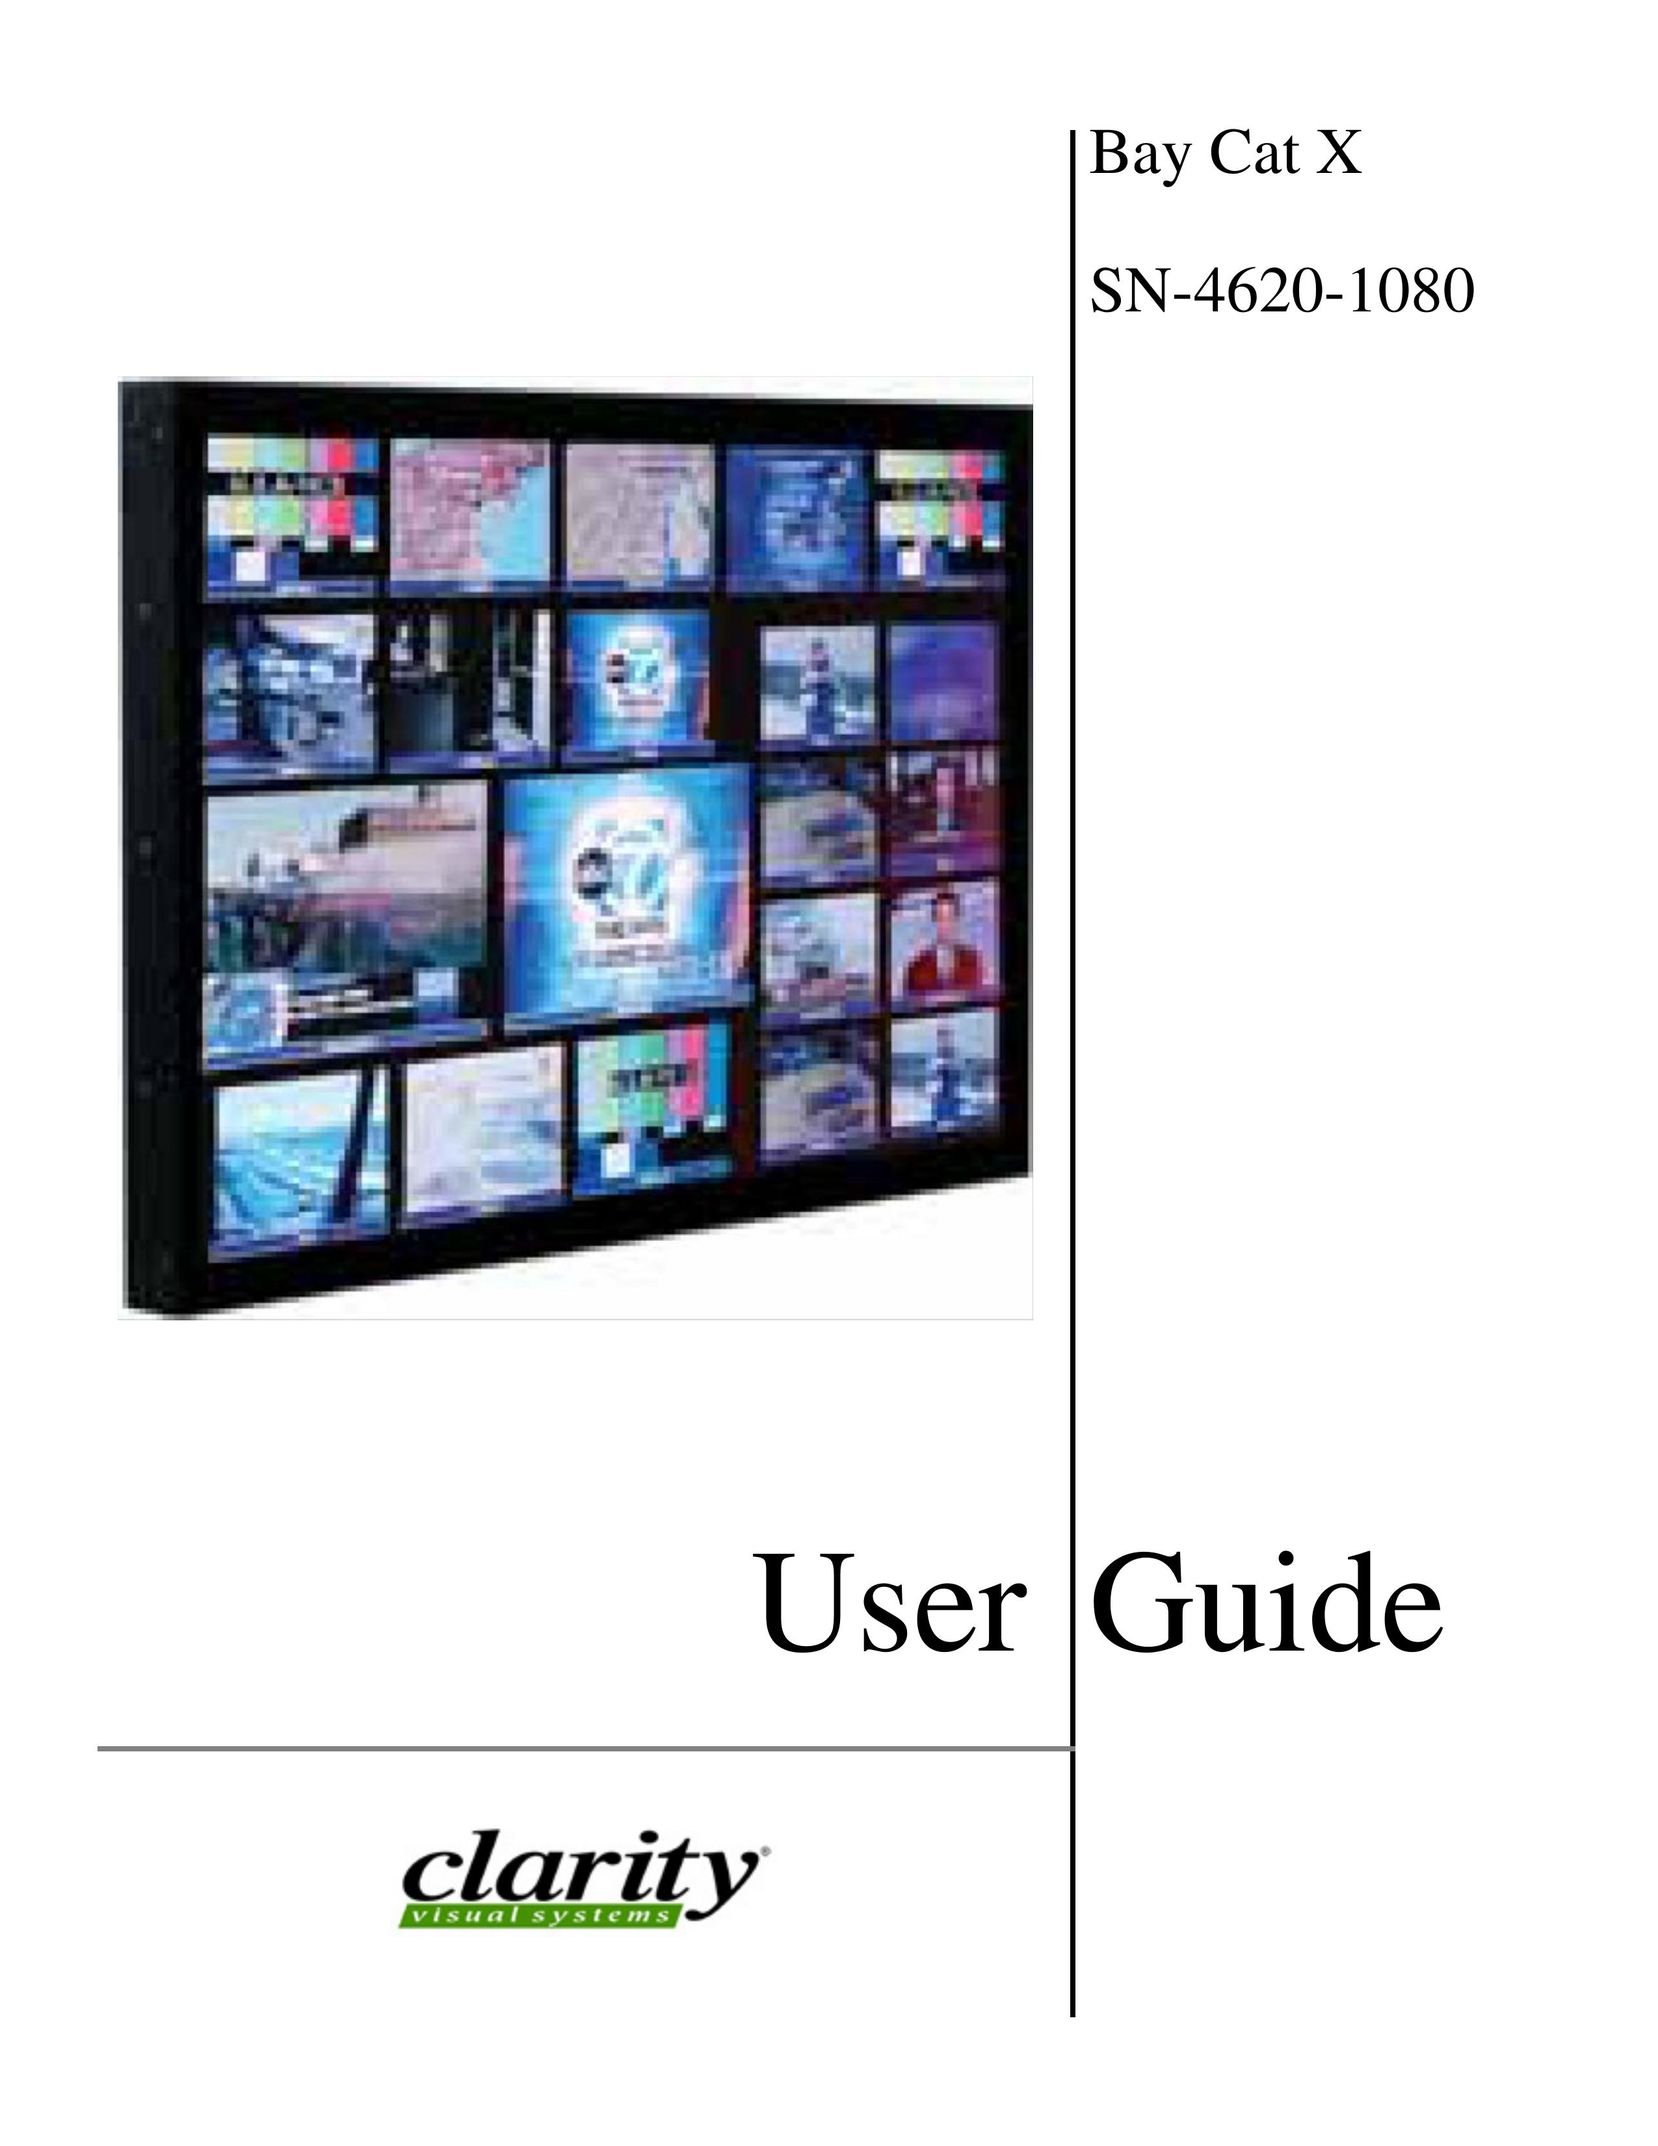 Clarity SN-4620-1080 Flat Panel Television User Manual